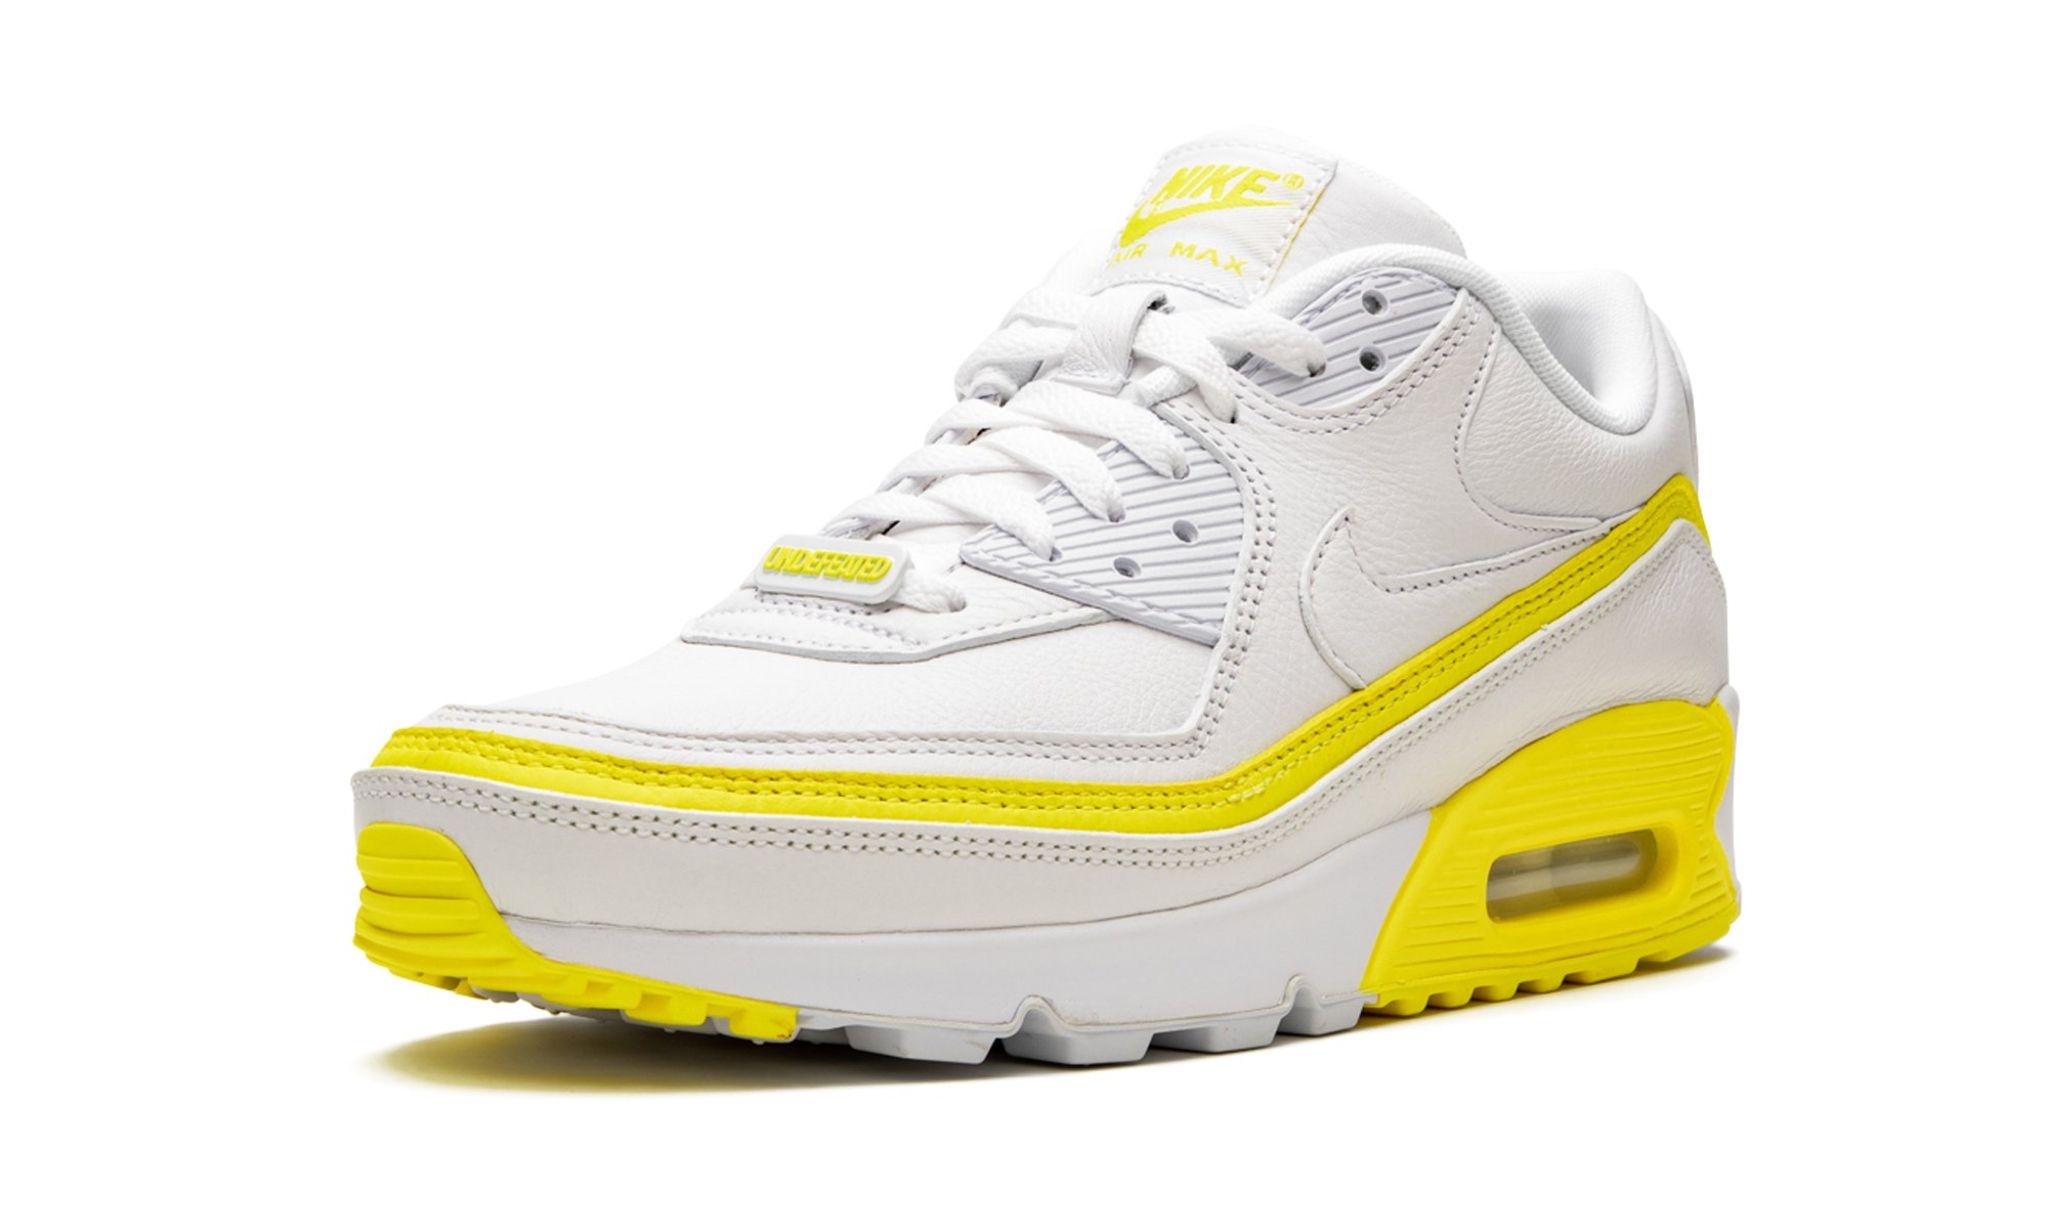 Air Max 90 / UNDFTD "Undefeated - White/Optic Yellow" - 4